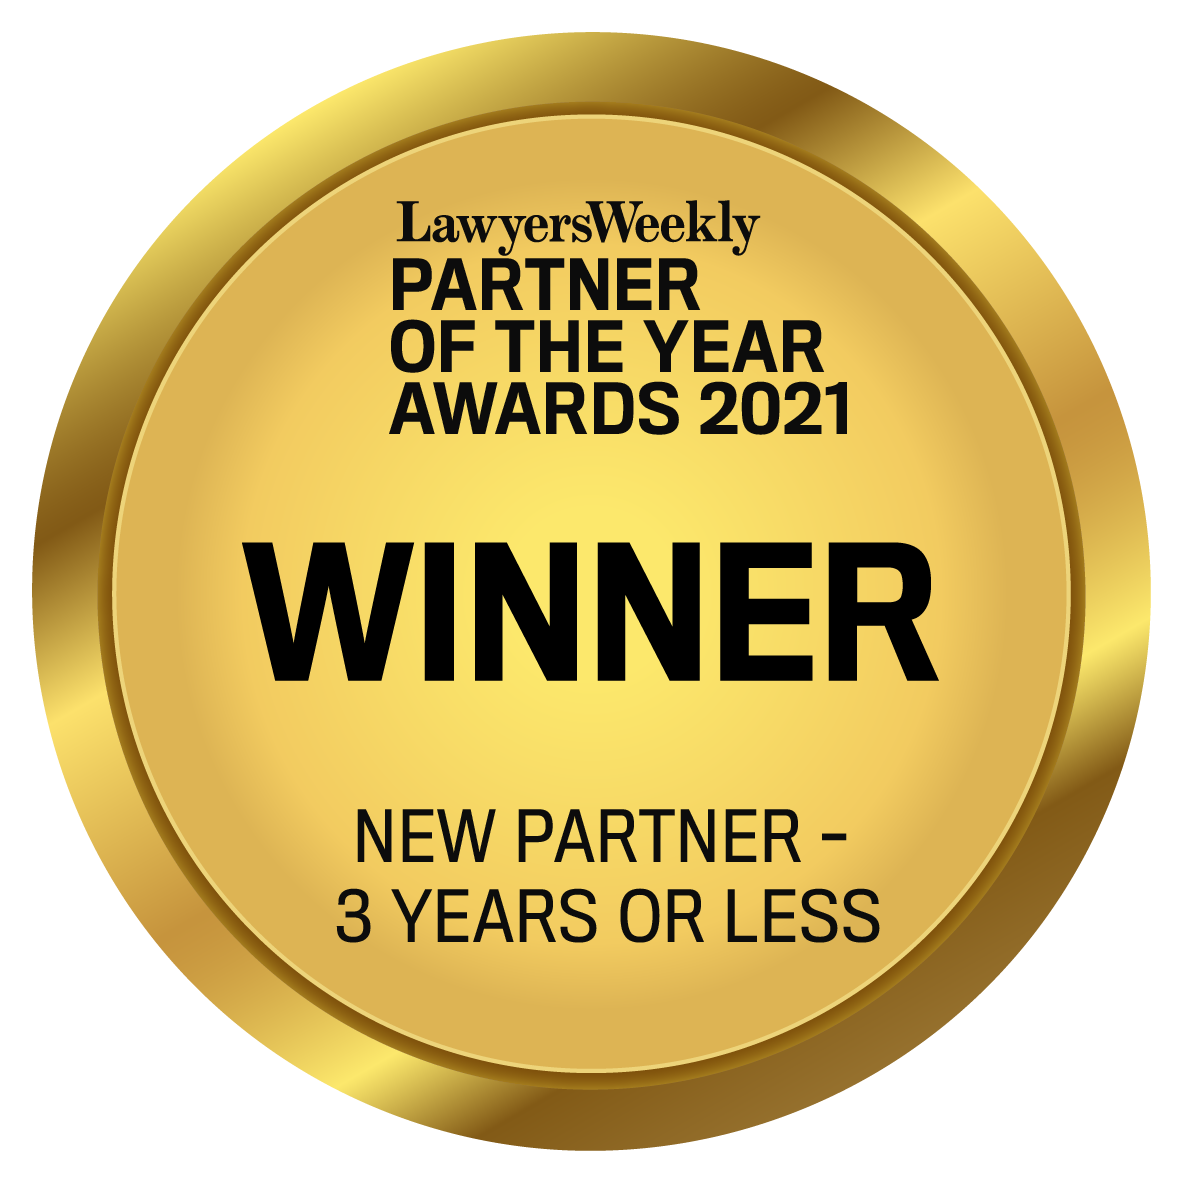 winners_New Partner of the Year - 3 years or less (1)